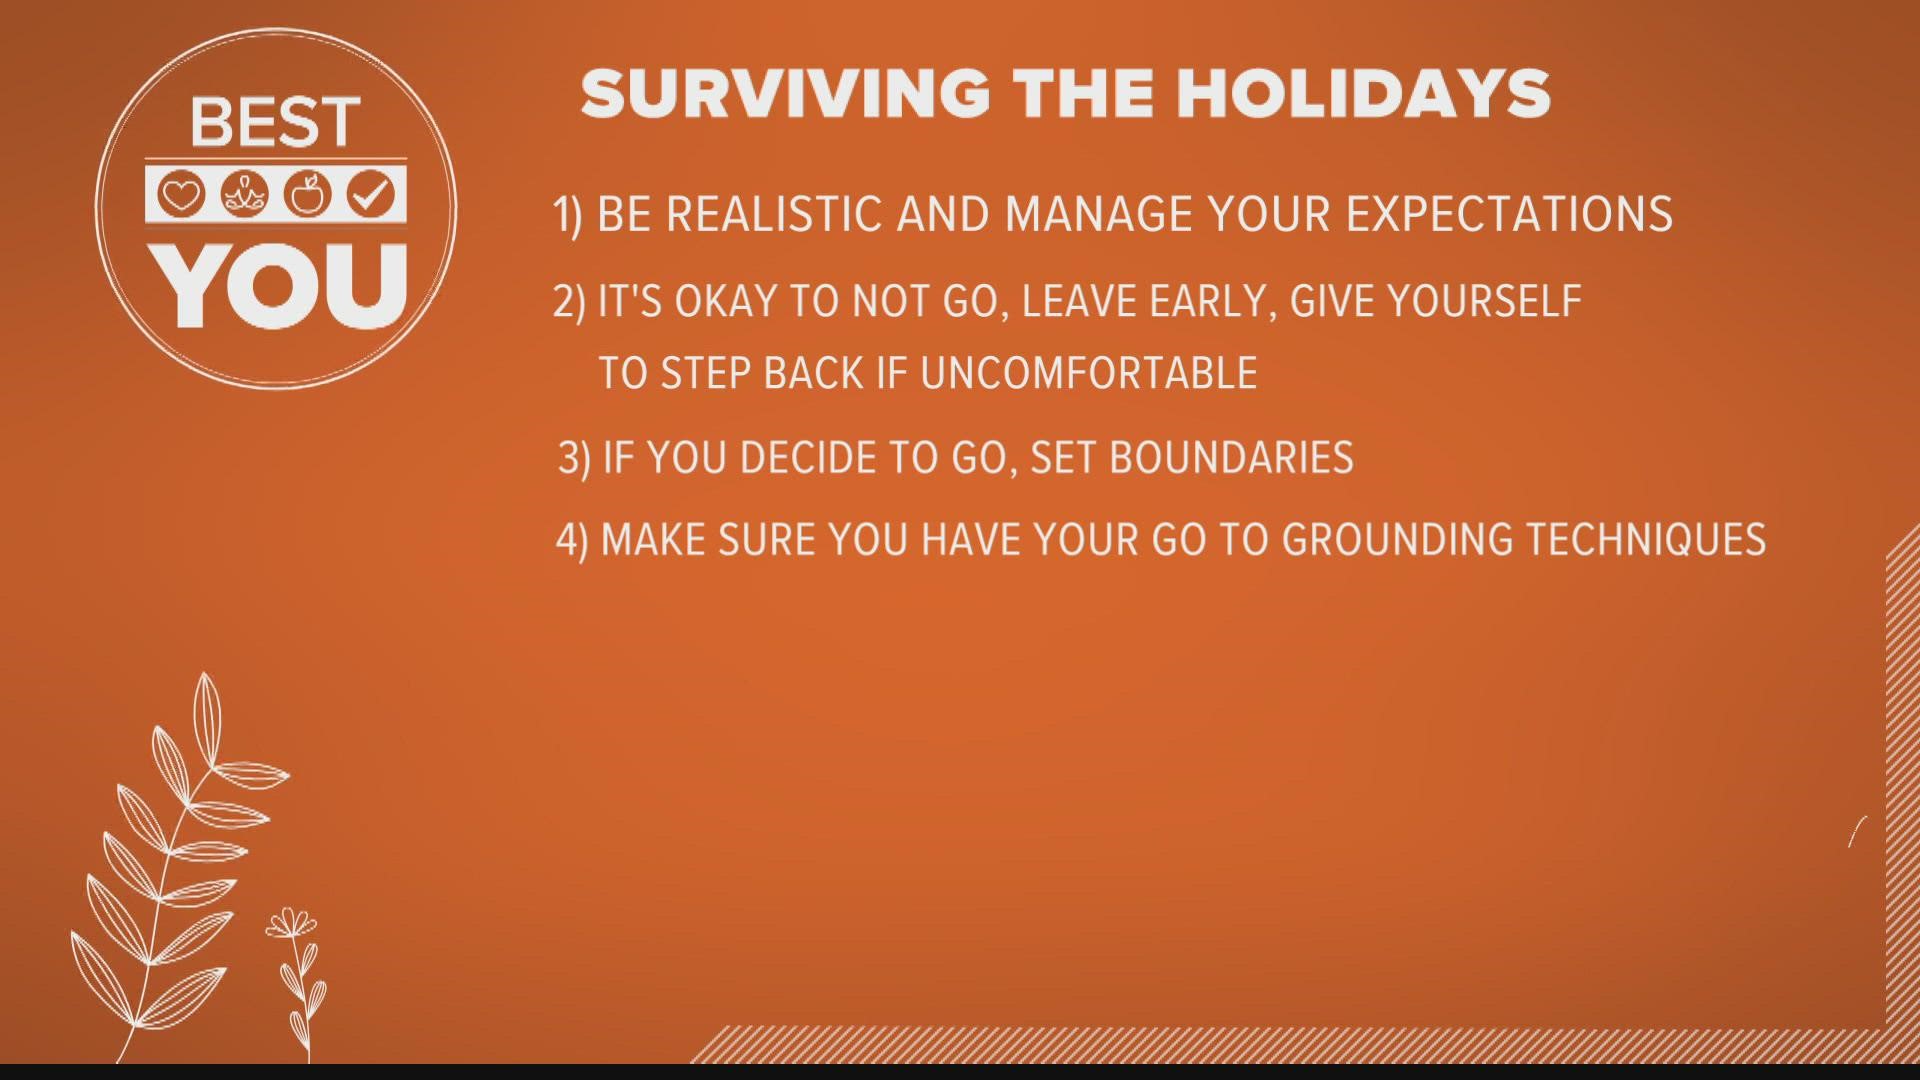 Vanessa Enos, a behavioral health therapist at Community Health, offers some tips to help you enjoy the holidays without the drama.